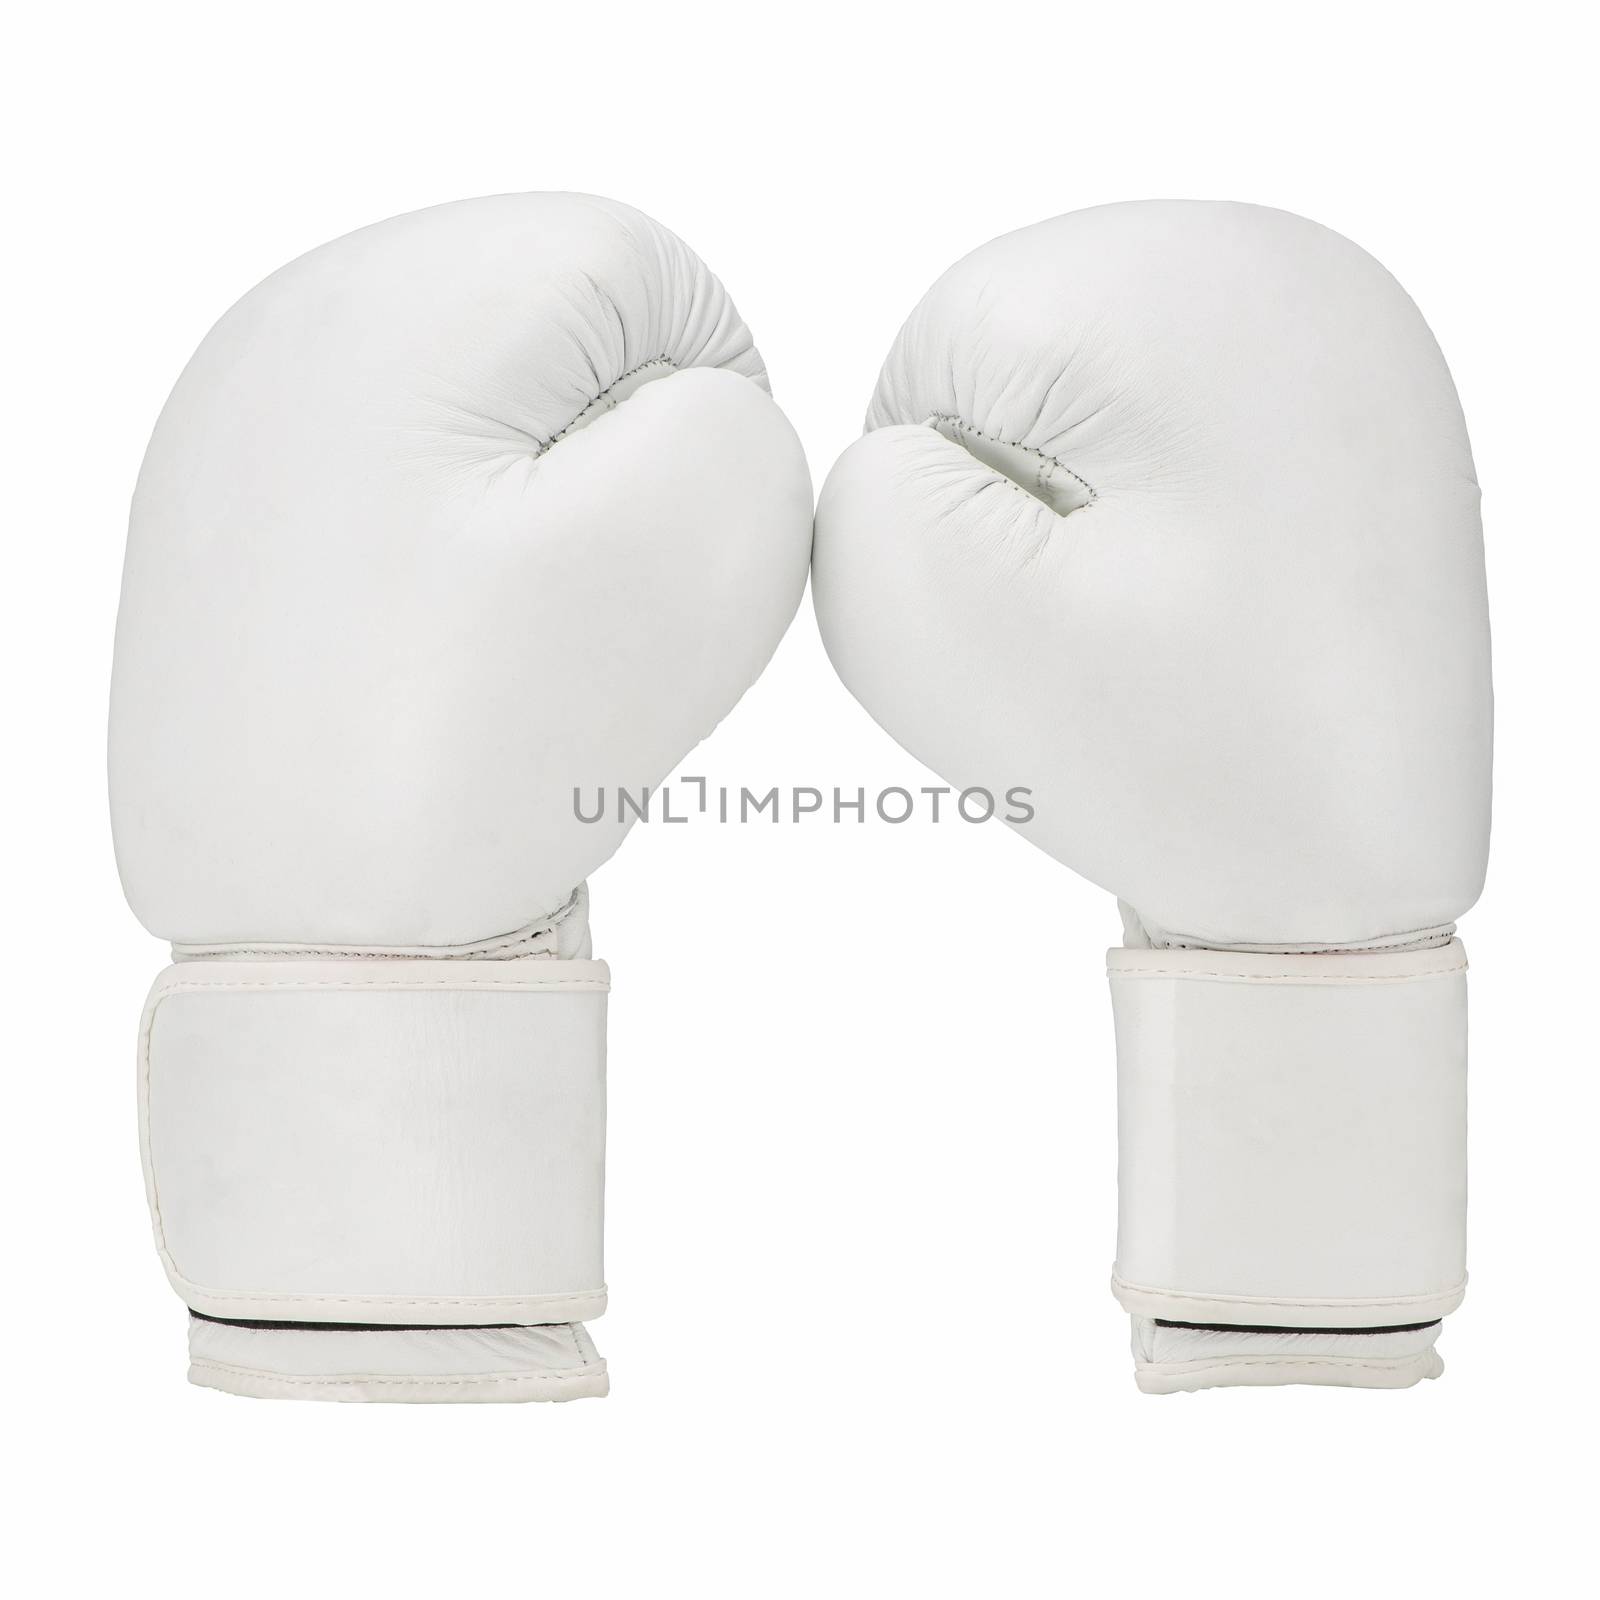 boxing gloves isolated on white background. sportswear